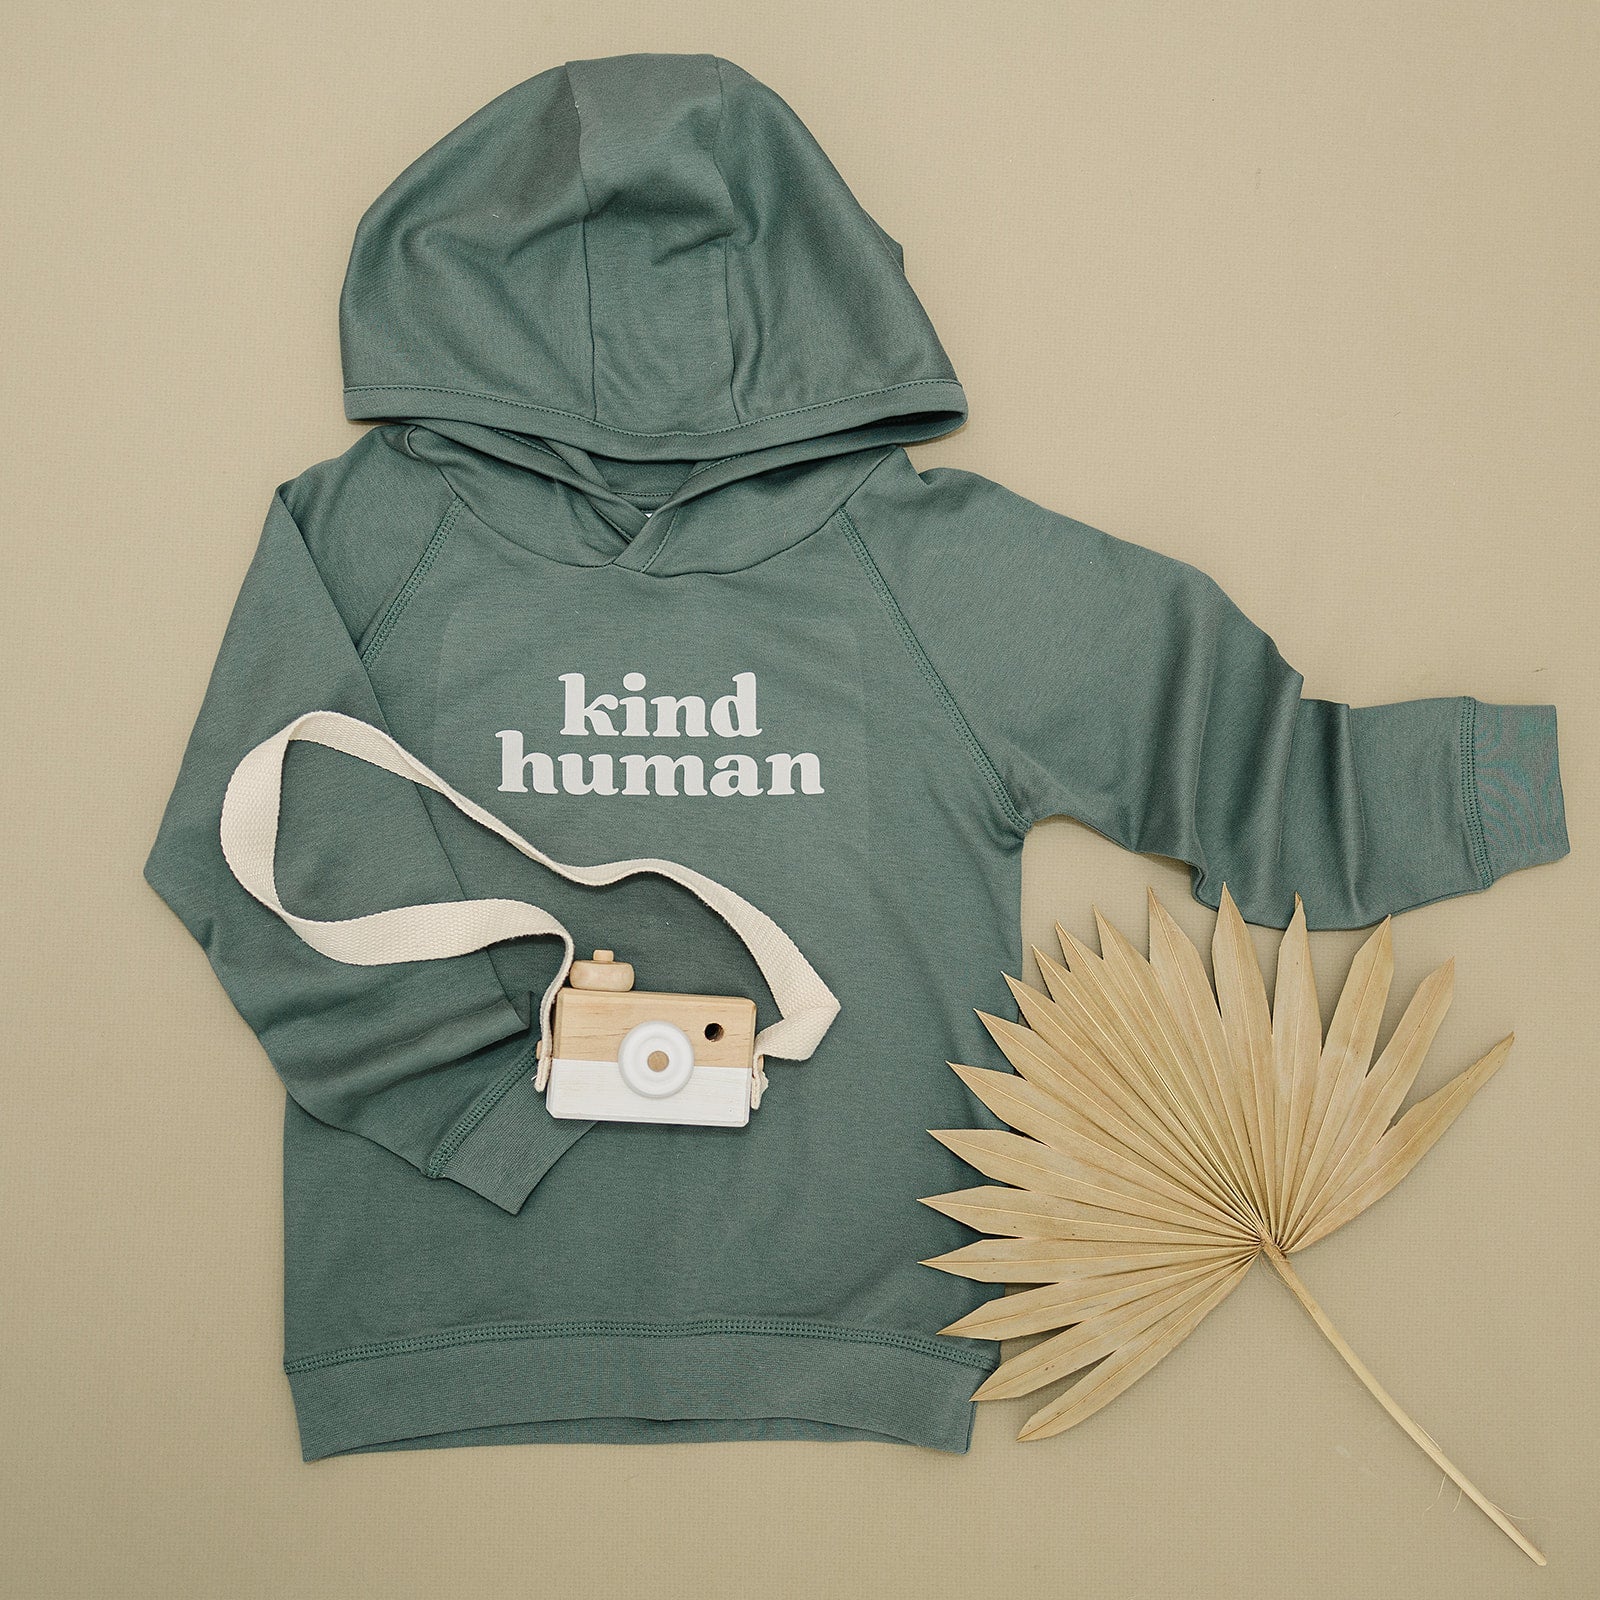 Olive green 'kind human' hoodie laid out with a wooden toy camera and a large dried palm leaf on a beige surface